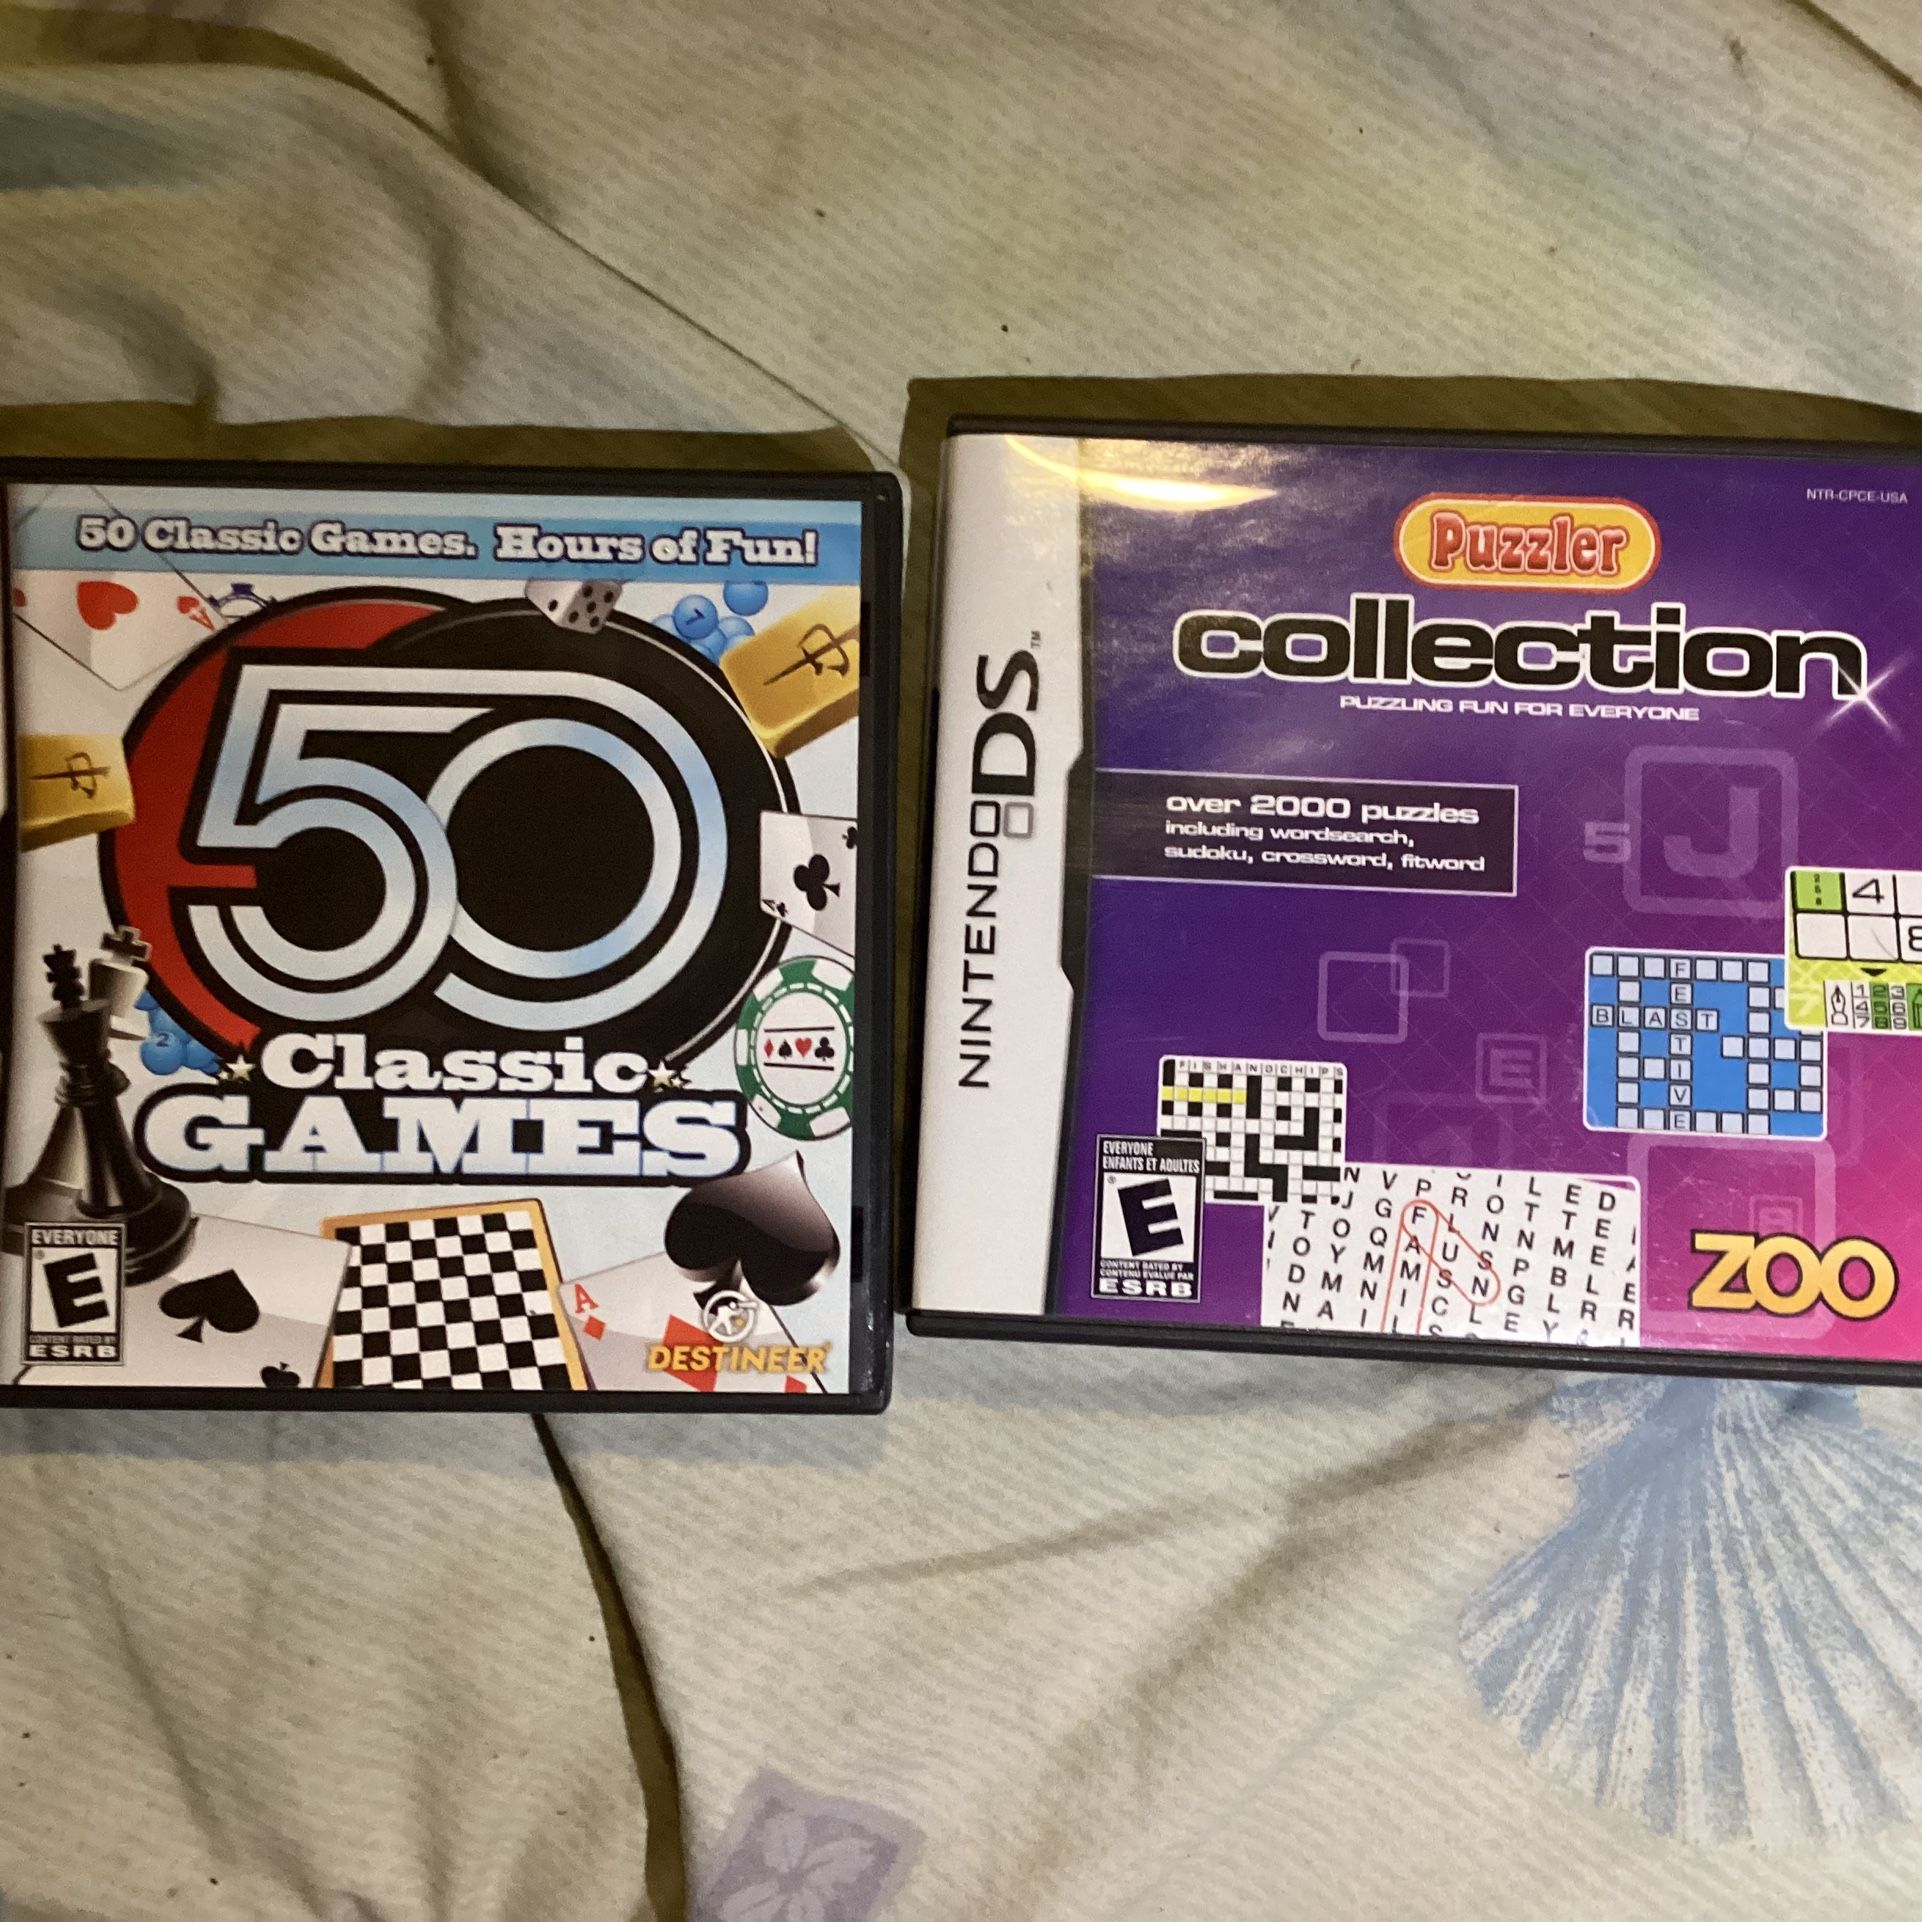 Puzzler Collection and 50 classic games for Nintendo DS